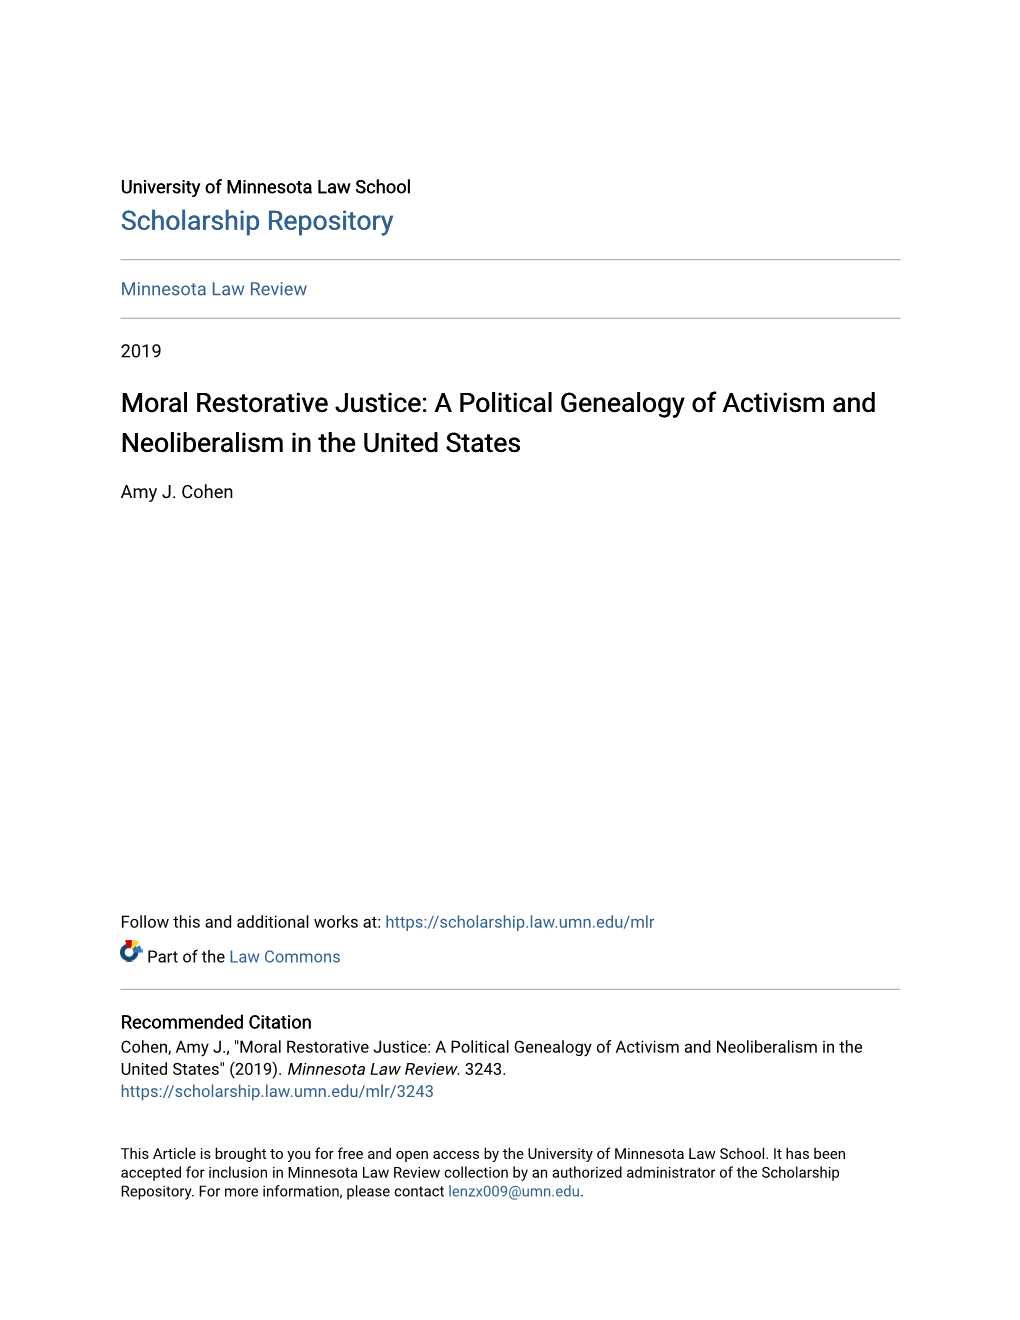 Moral Restorative Justice: a Political Genealogy of Activism and Neoliberalism in the United States